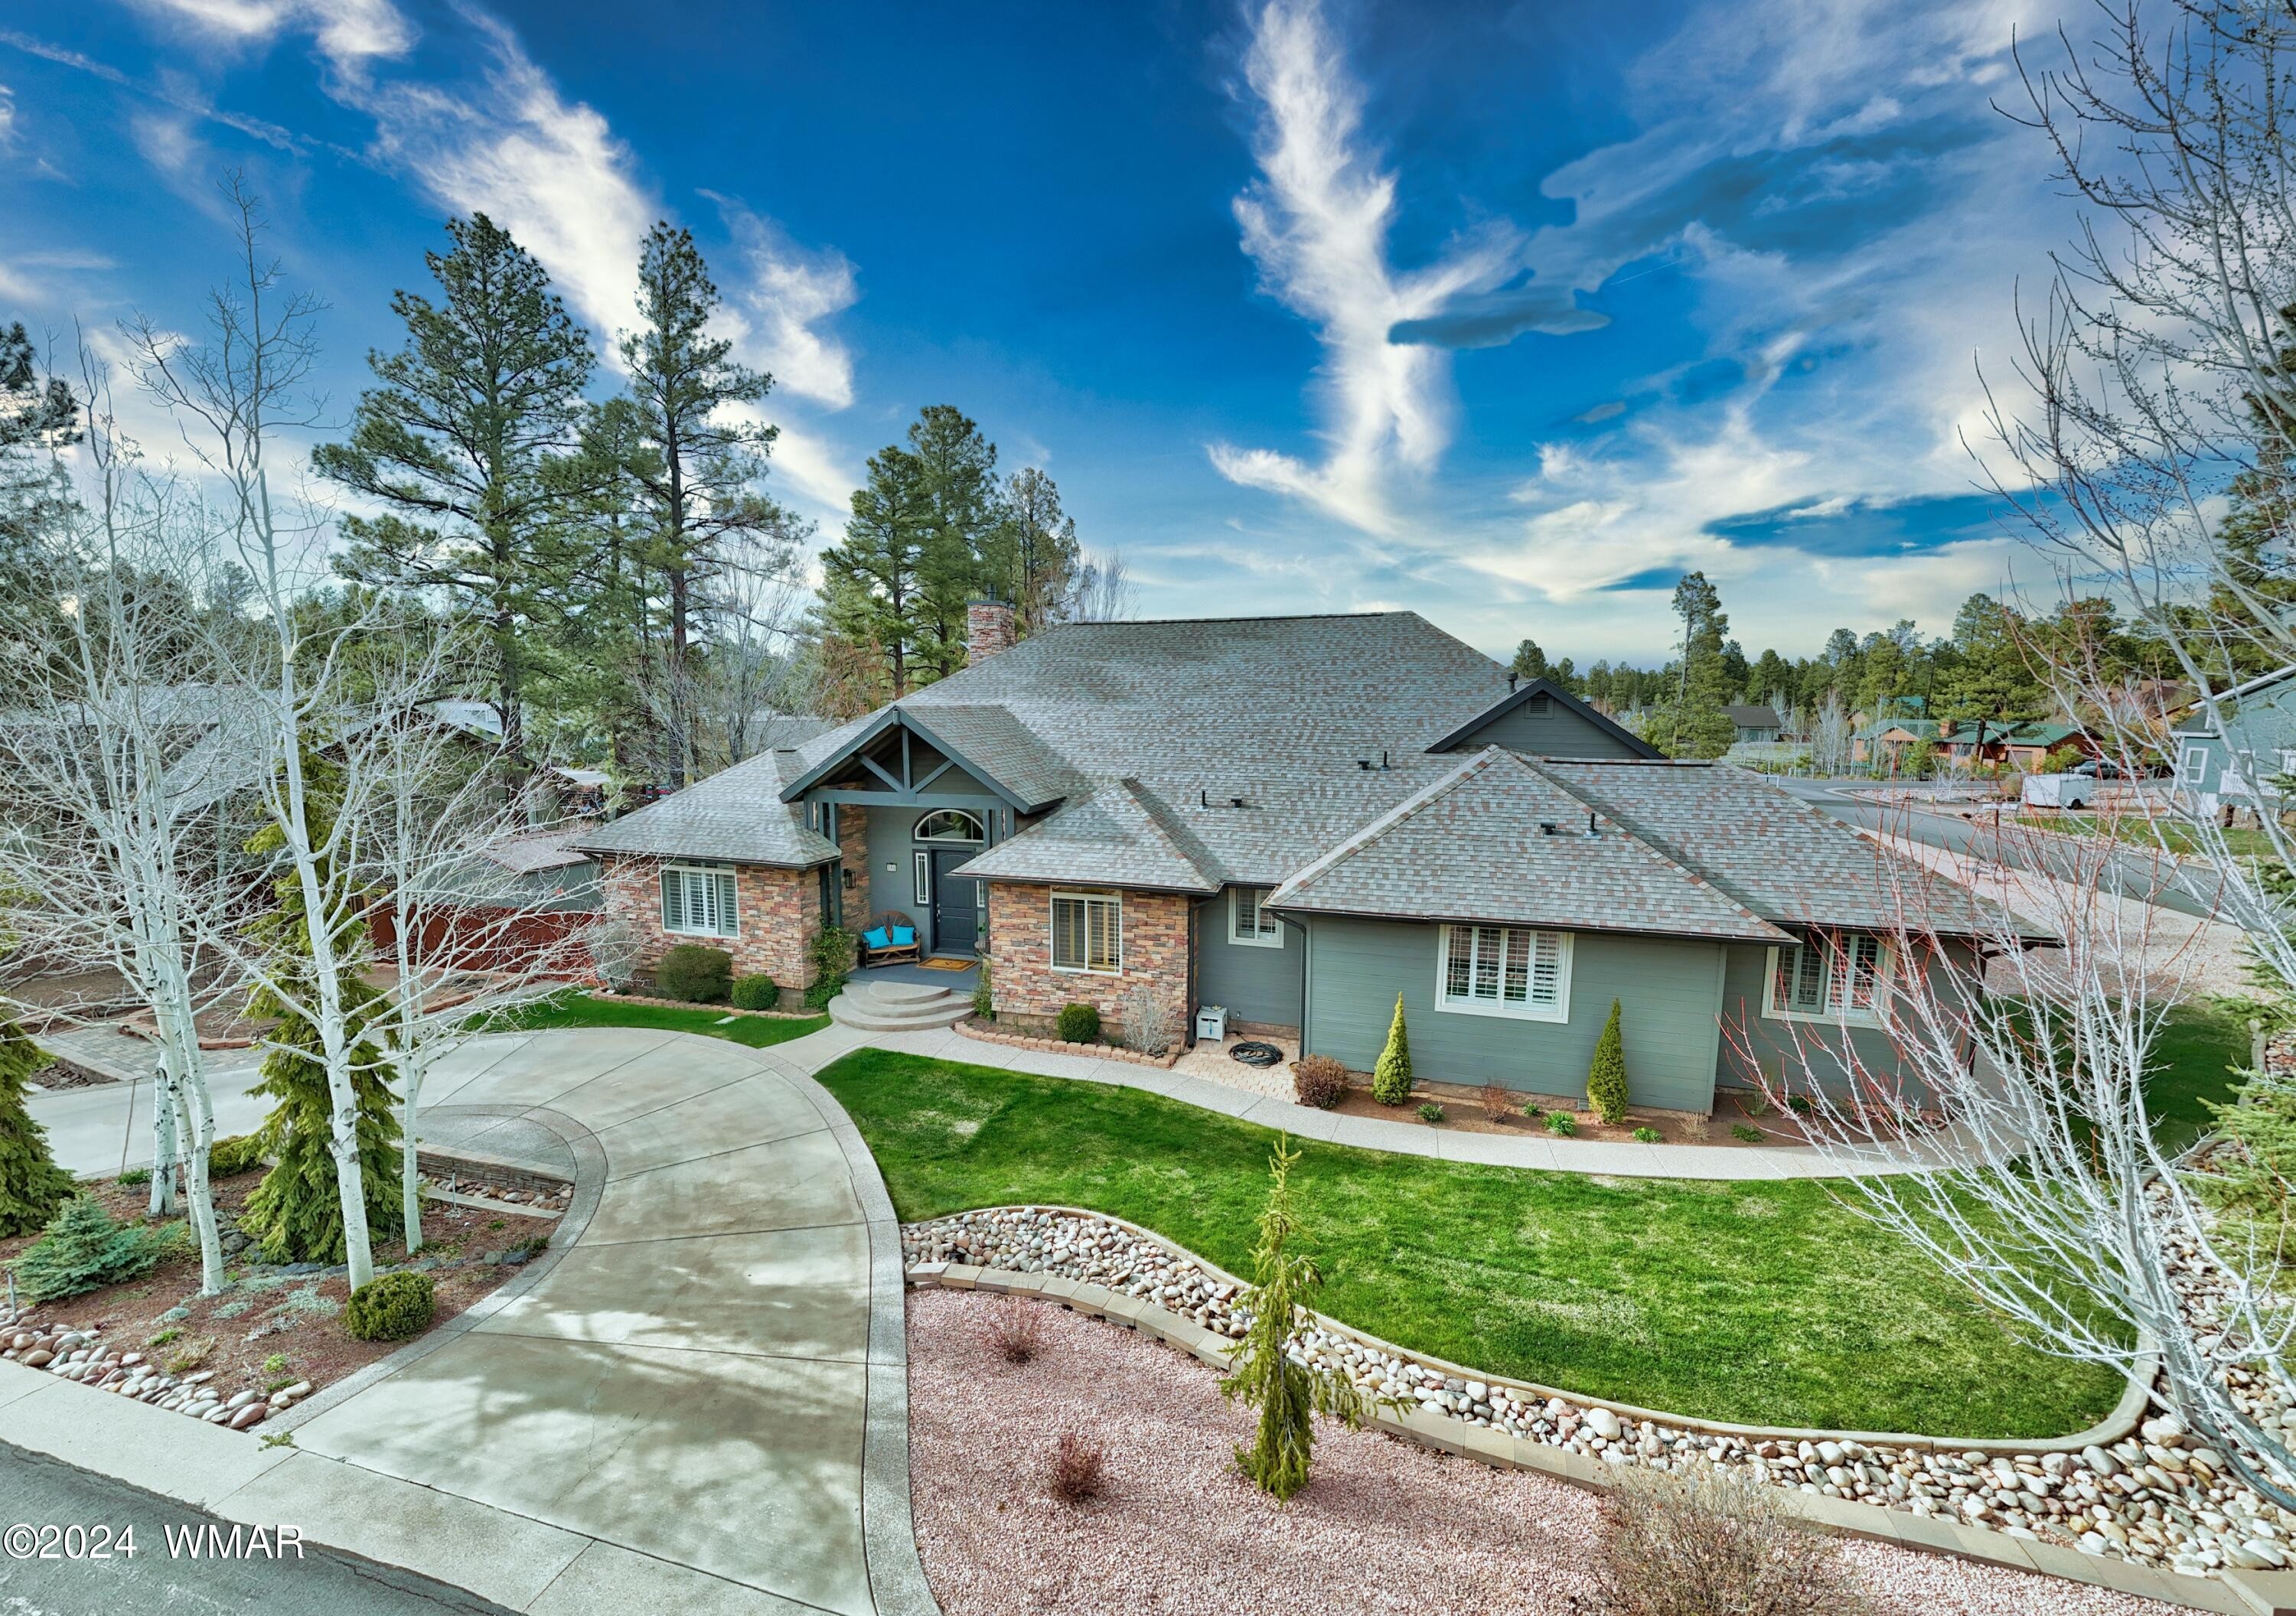 Pinetop, Arizona, 85935, United States, 4 Bedrooms Bedrooms, ,3.5 BathroomsBathrooms,Residential,For Sale,1510370